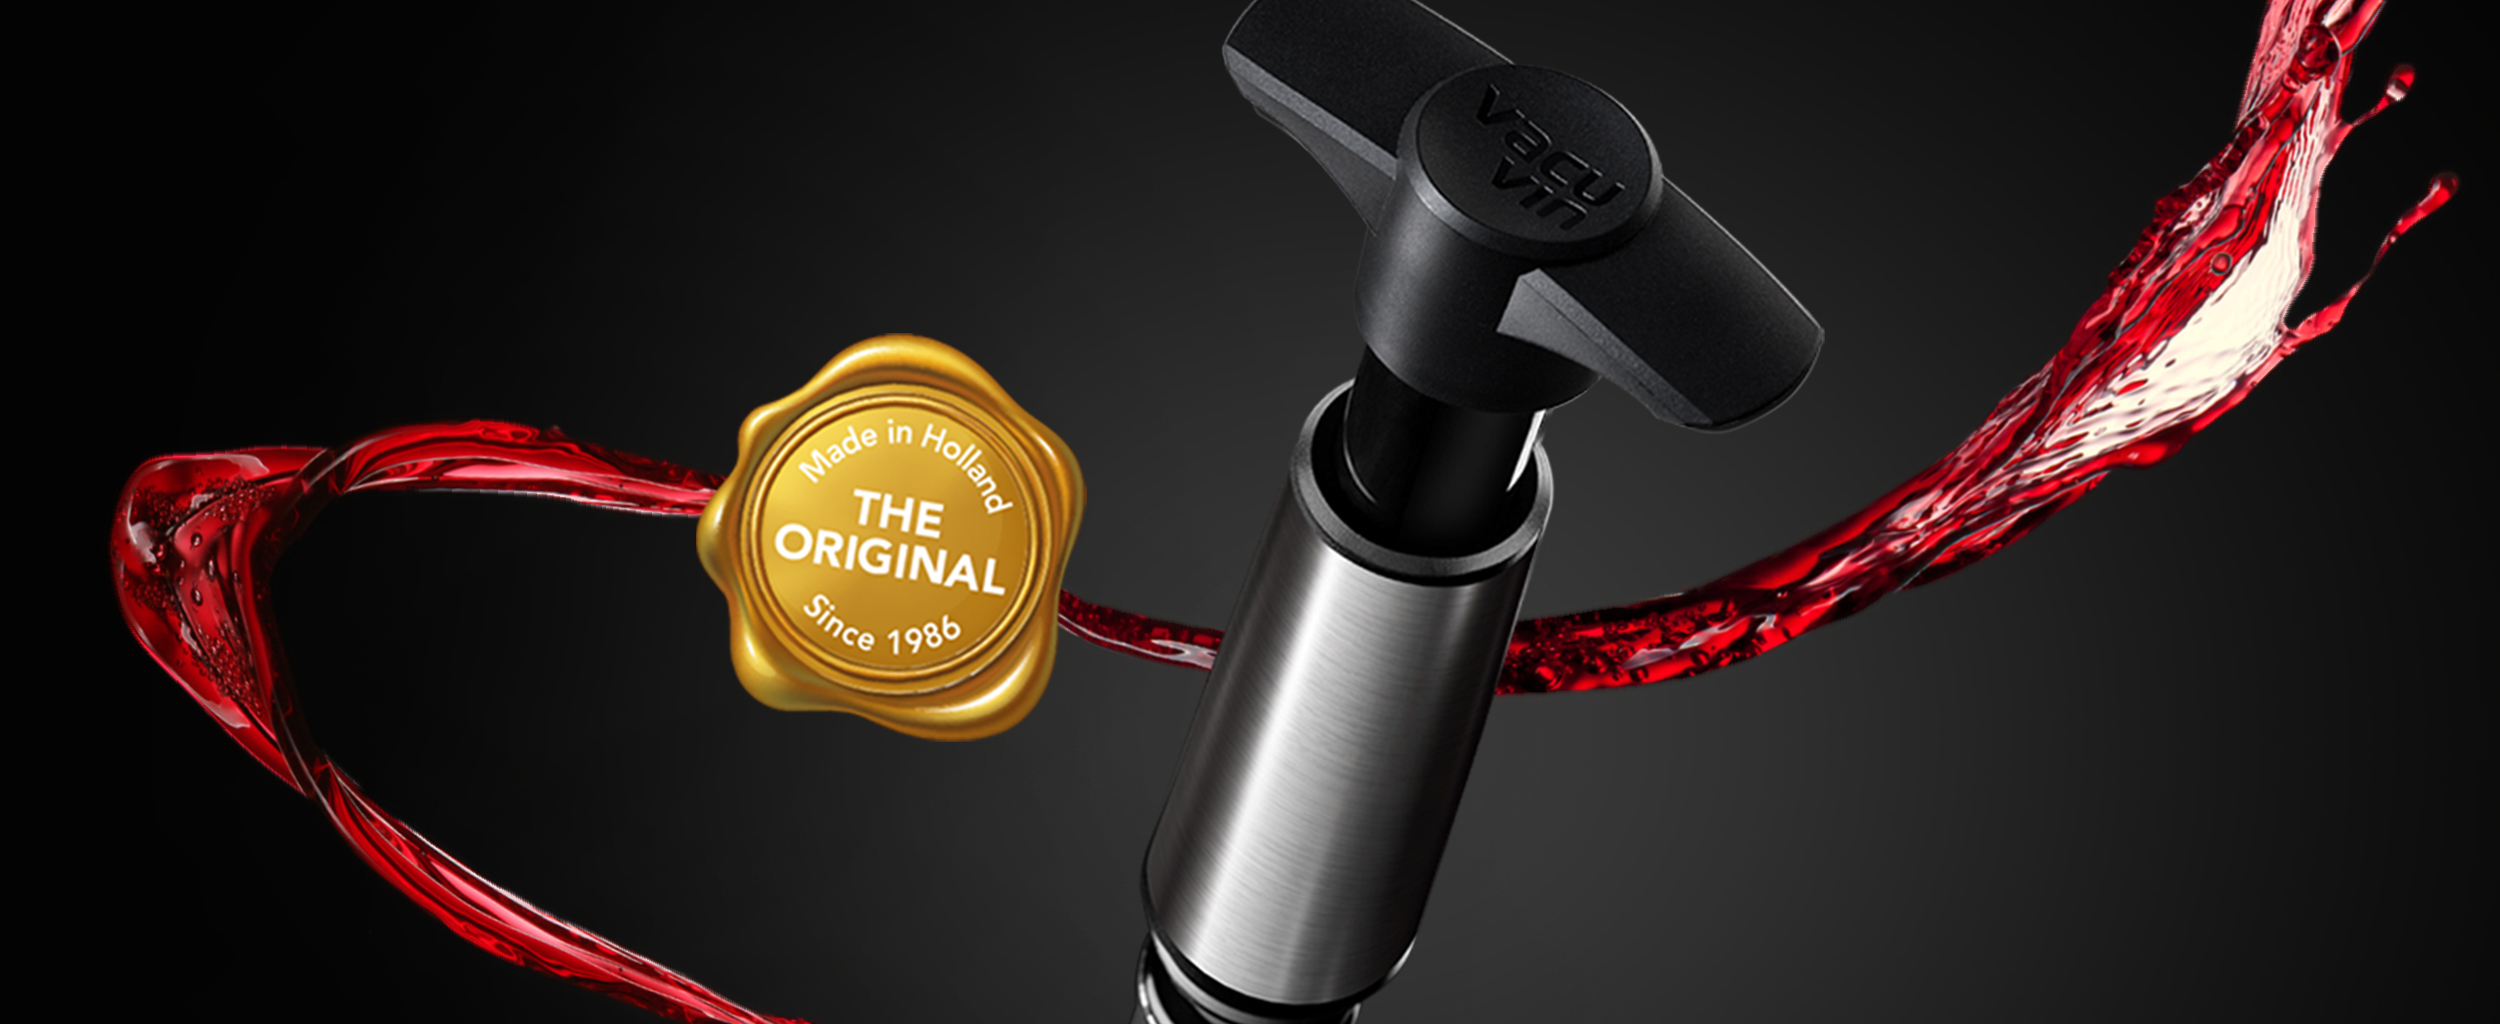 Vacu Vin Premium Wine Accessories The perfect gifts for wine lovers image